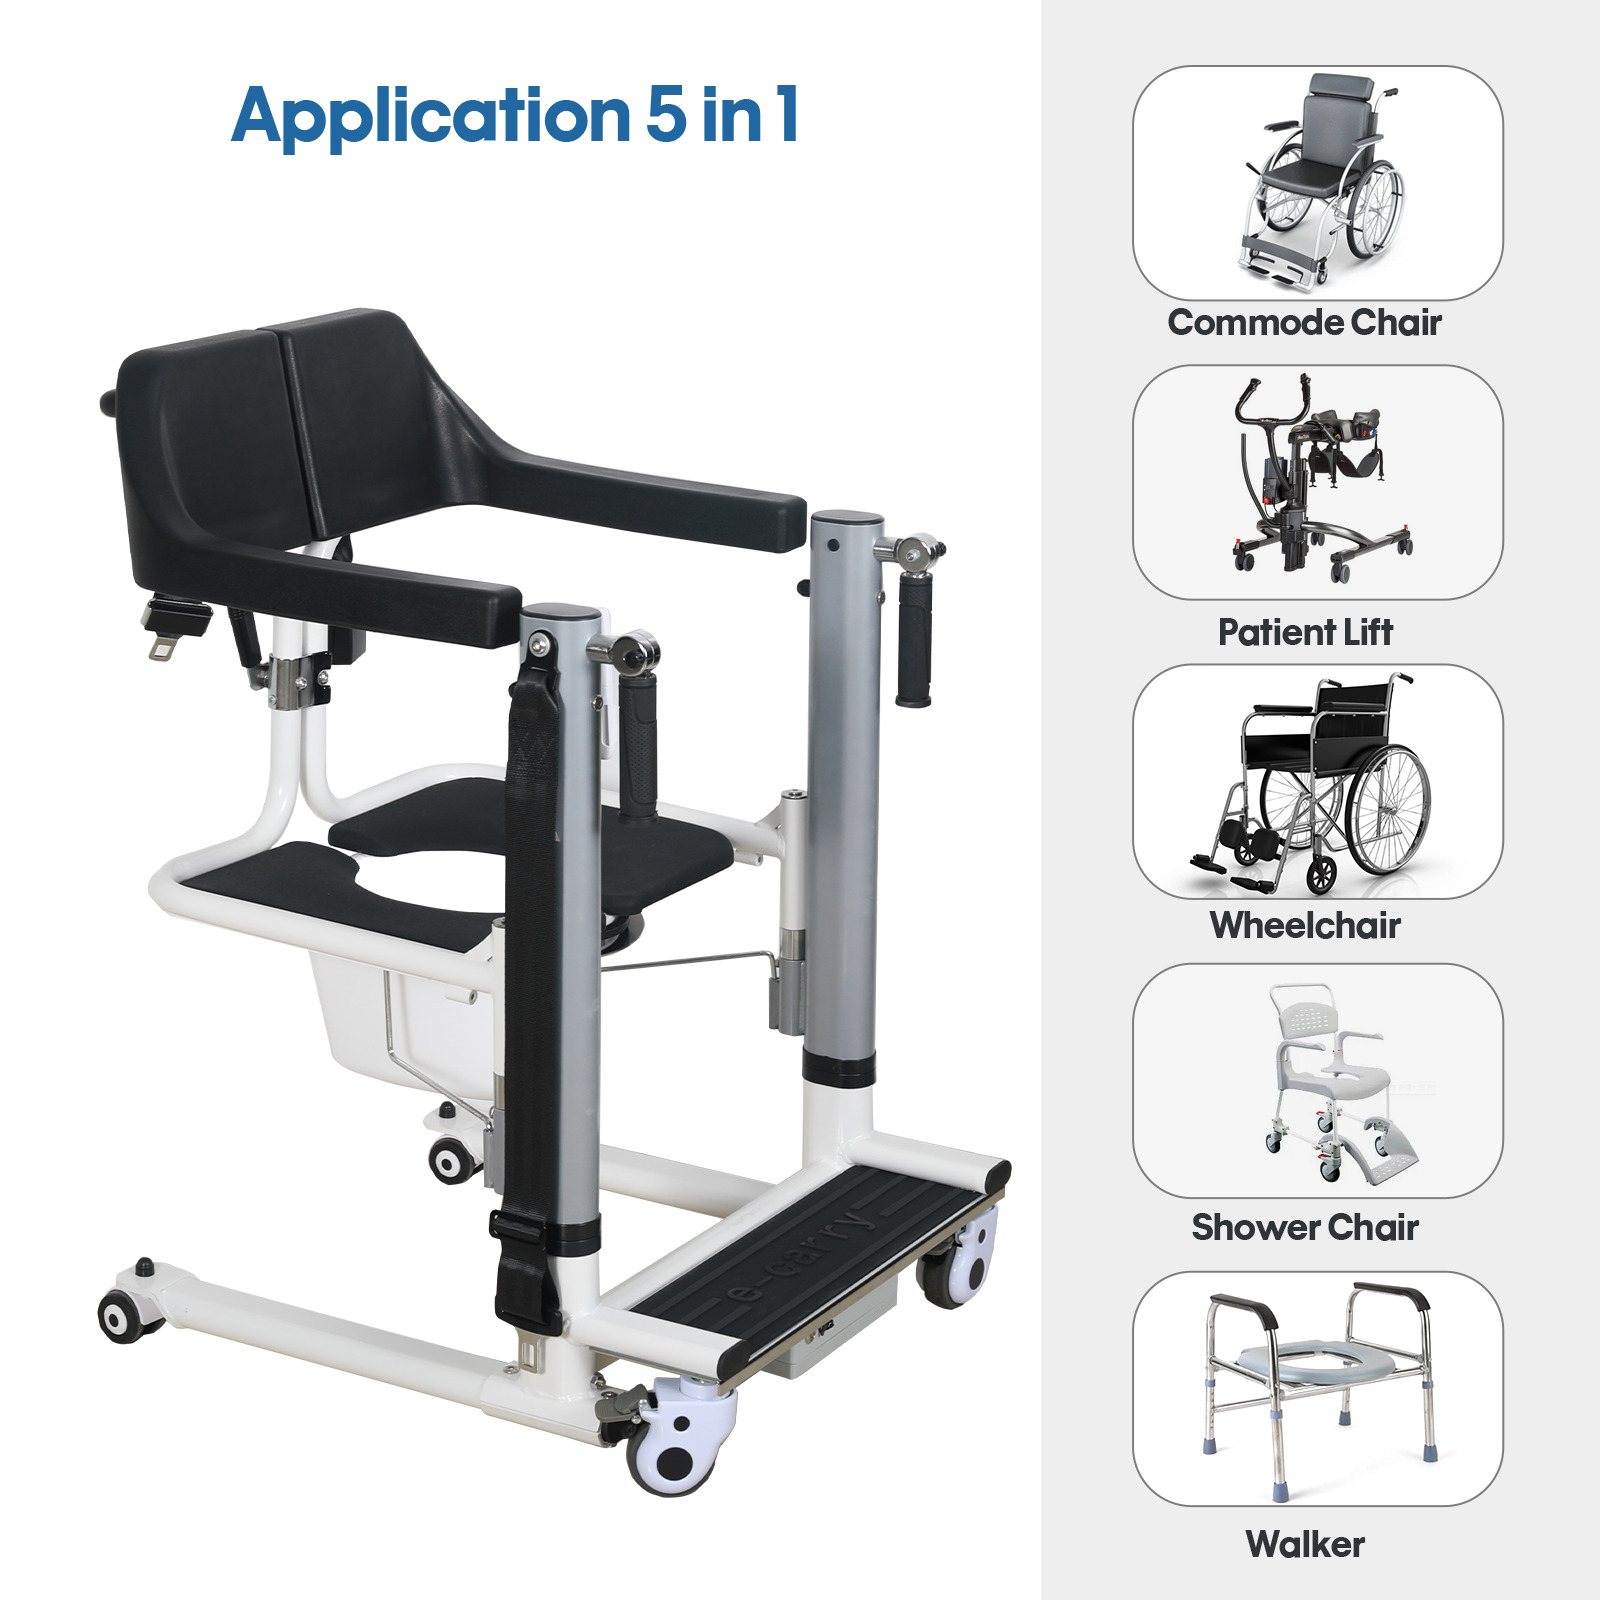 https://www.xflmedical.com/electric-lift-disabled-transfer-chair-product/